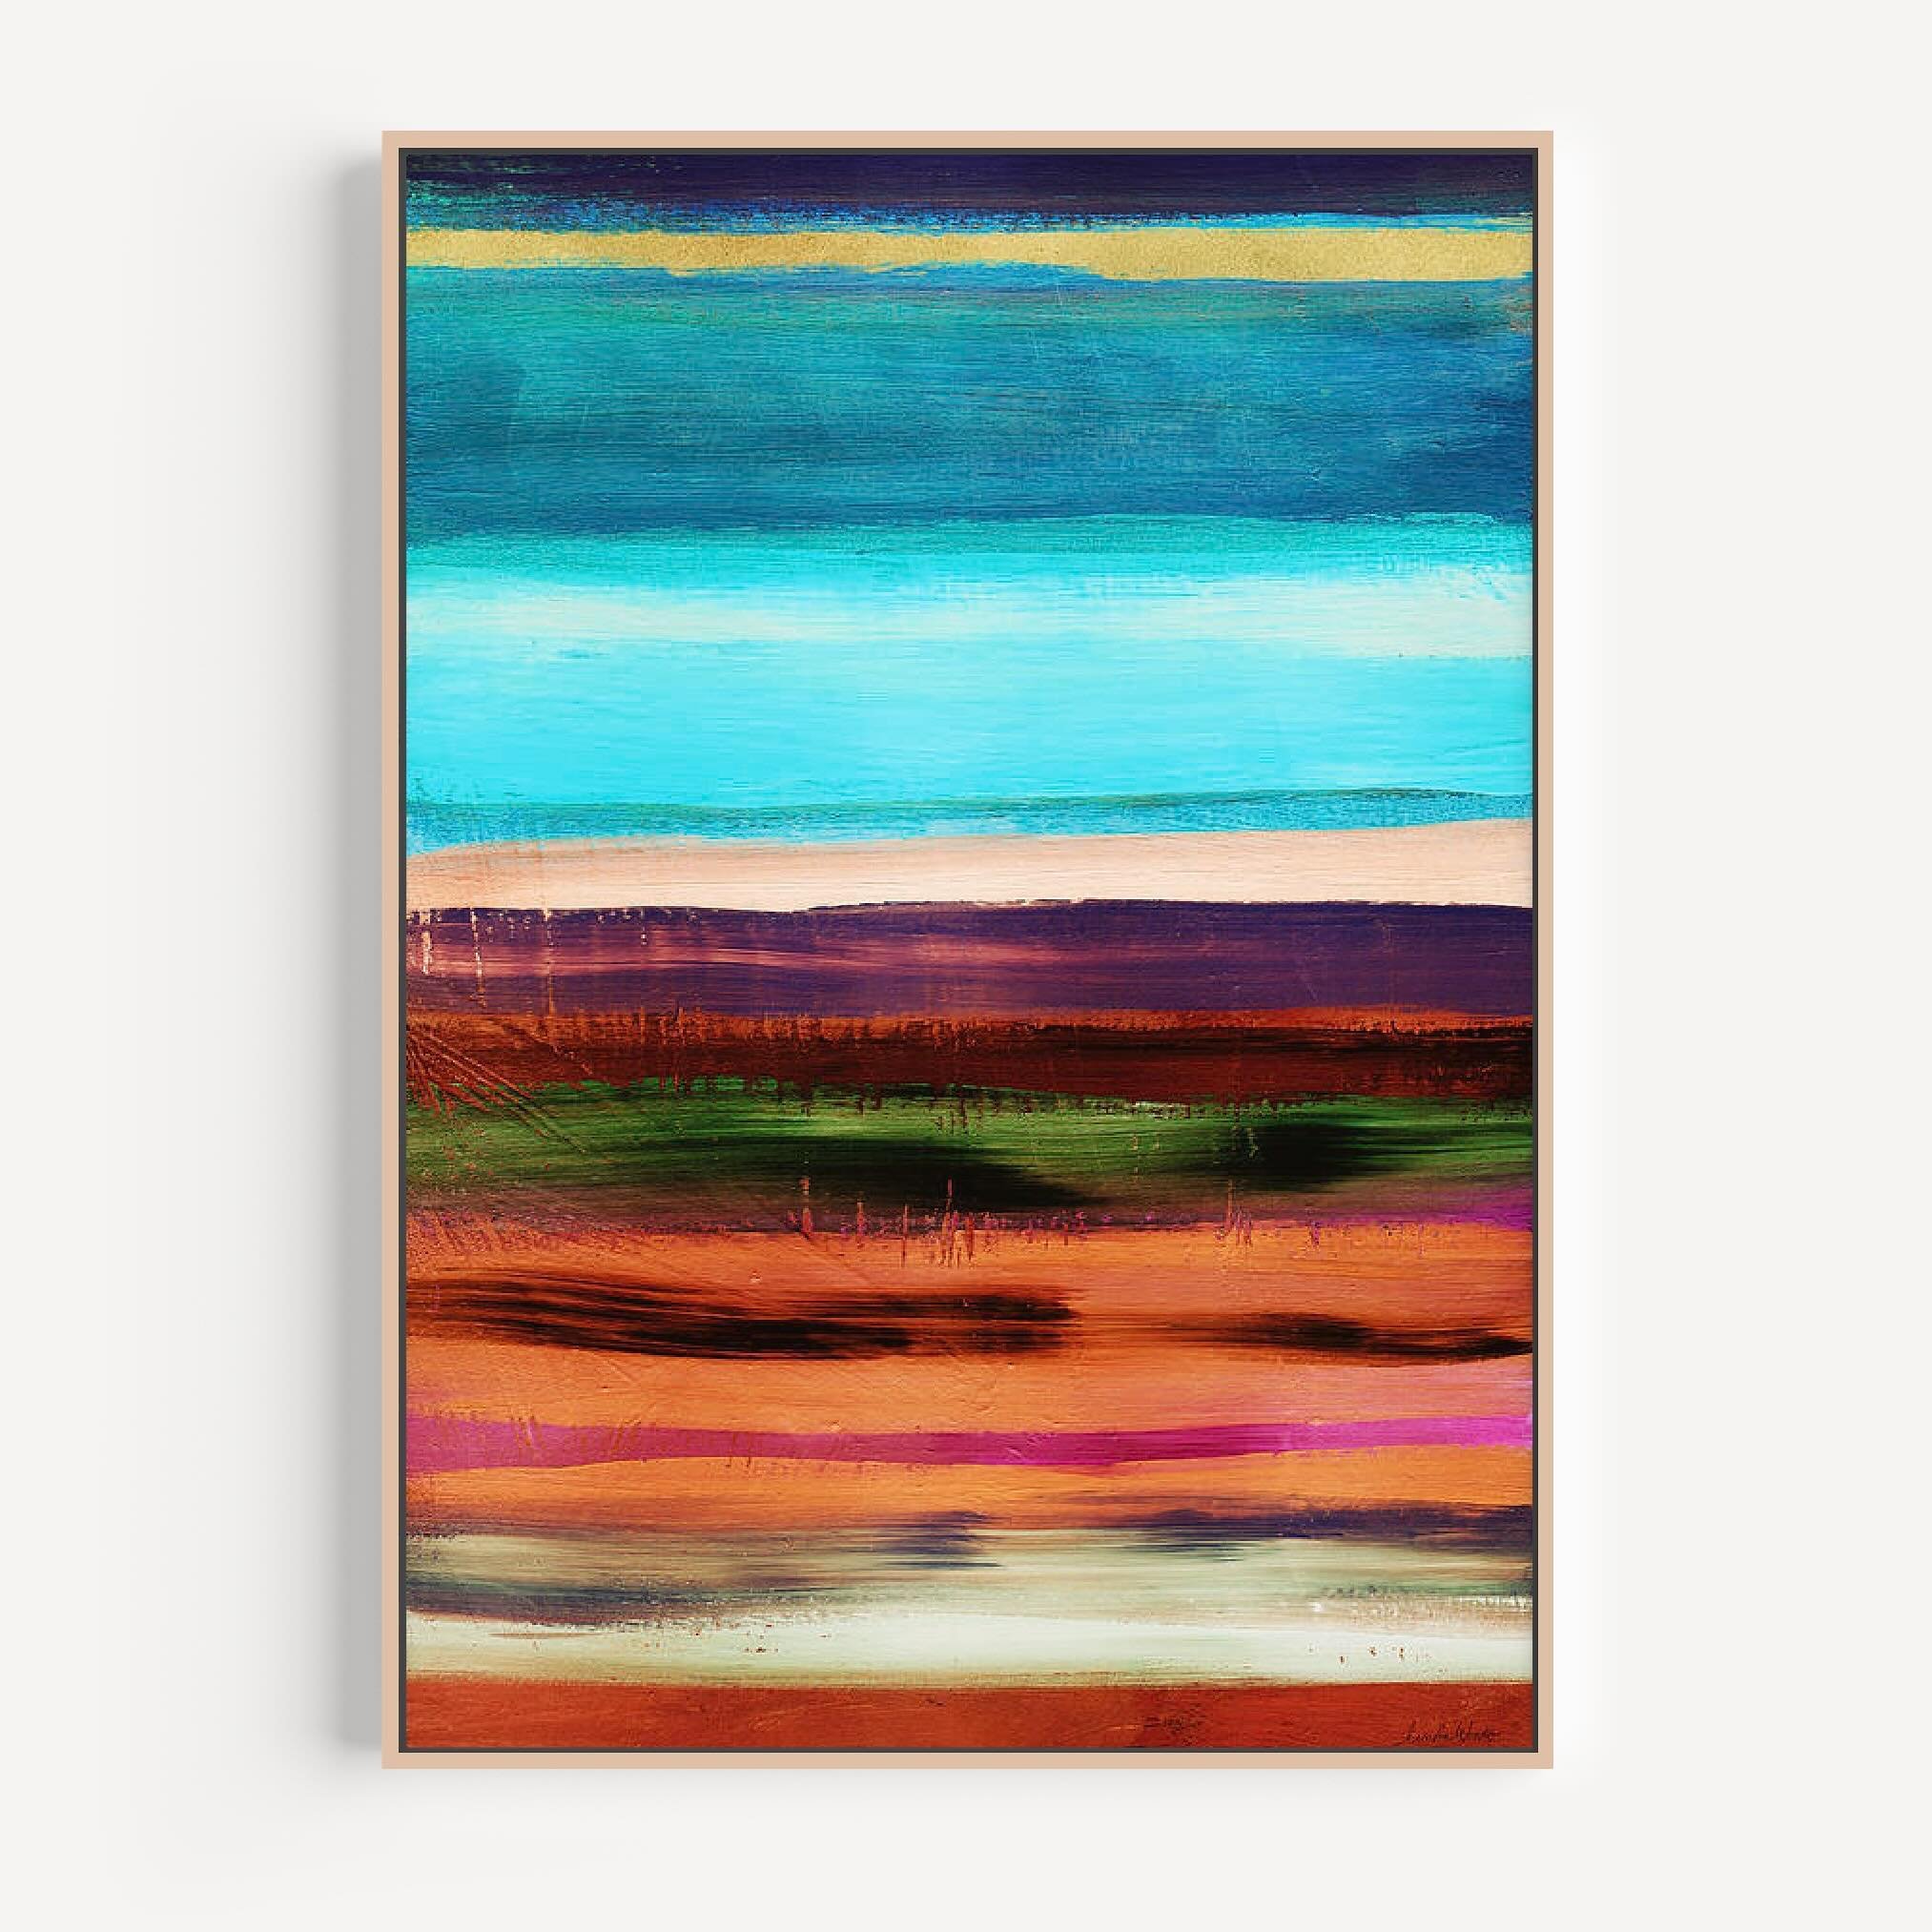 A custom piece for a client inspired by the colors of Colorado. 

Title: Pueblo 2
Prints for all size spaces and budgets are available in my shop. Link in bio @lindawoodsart